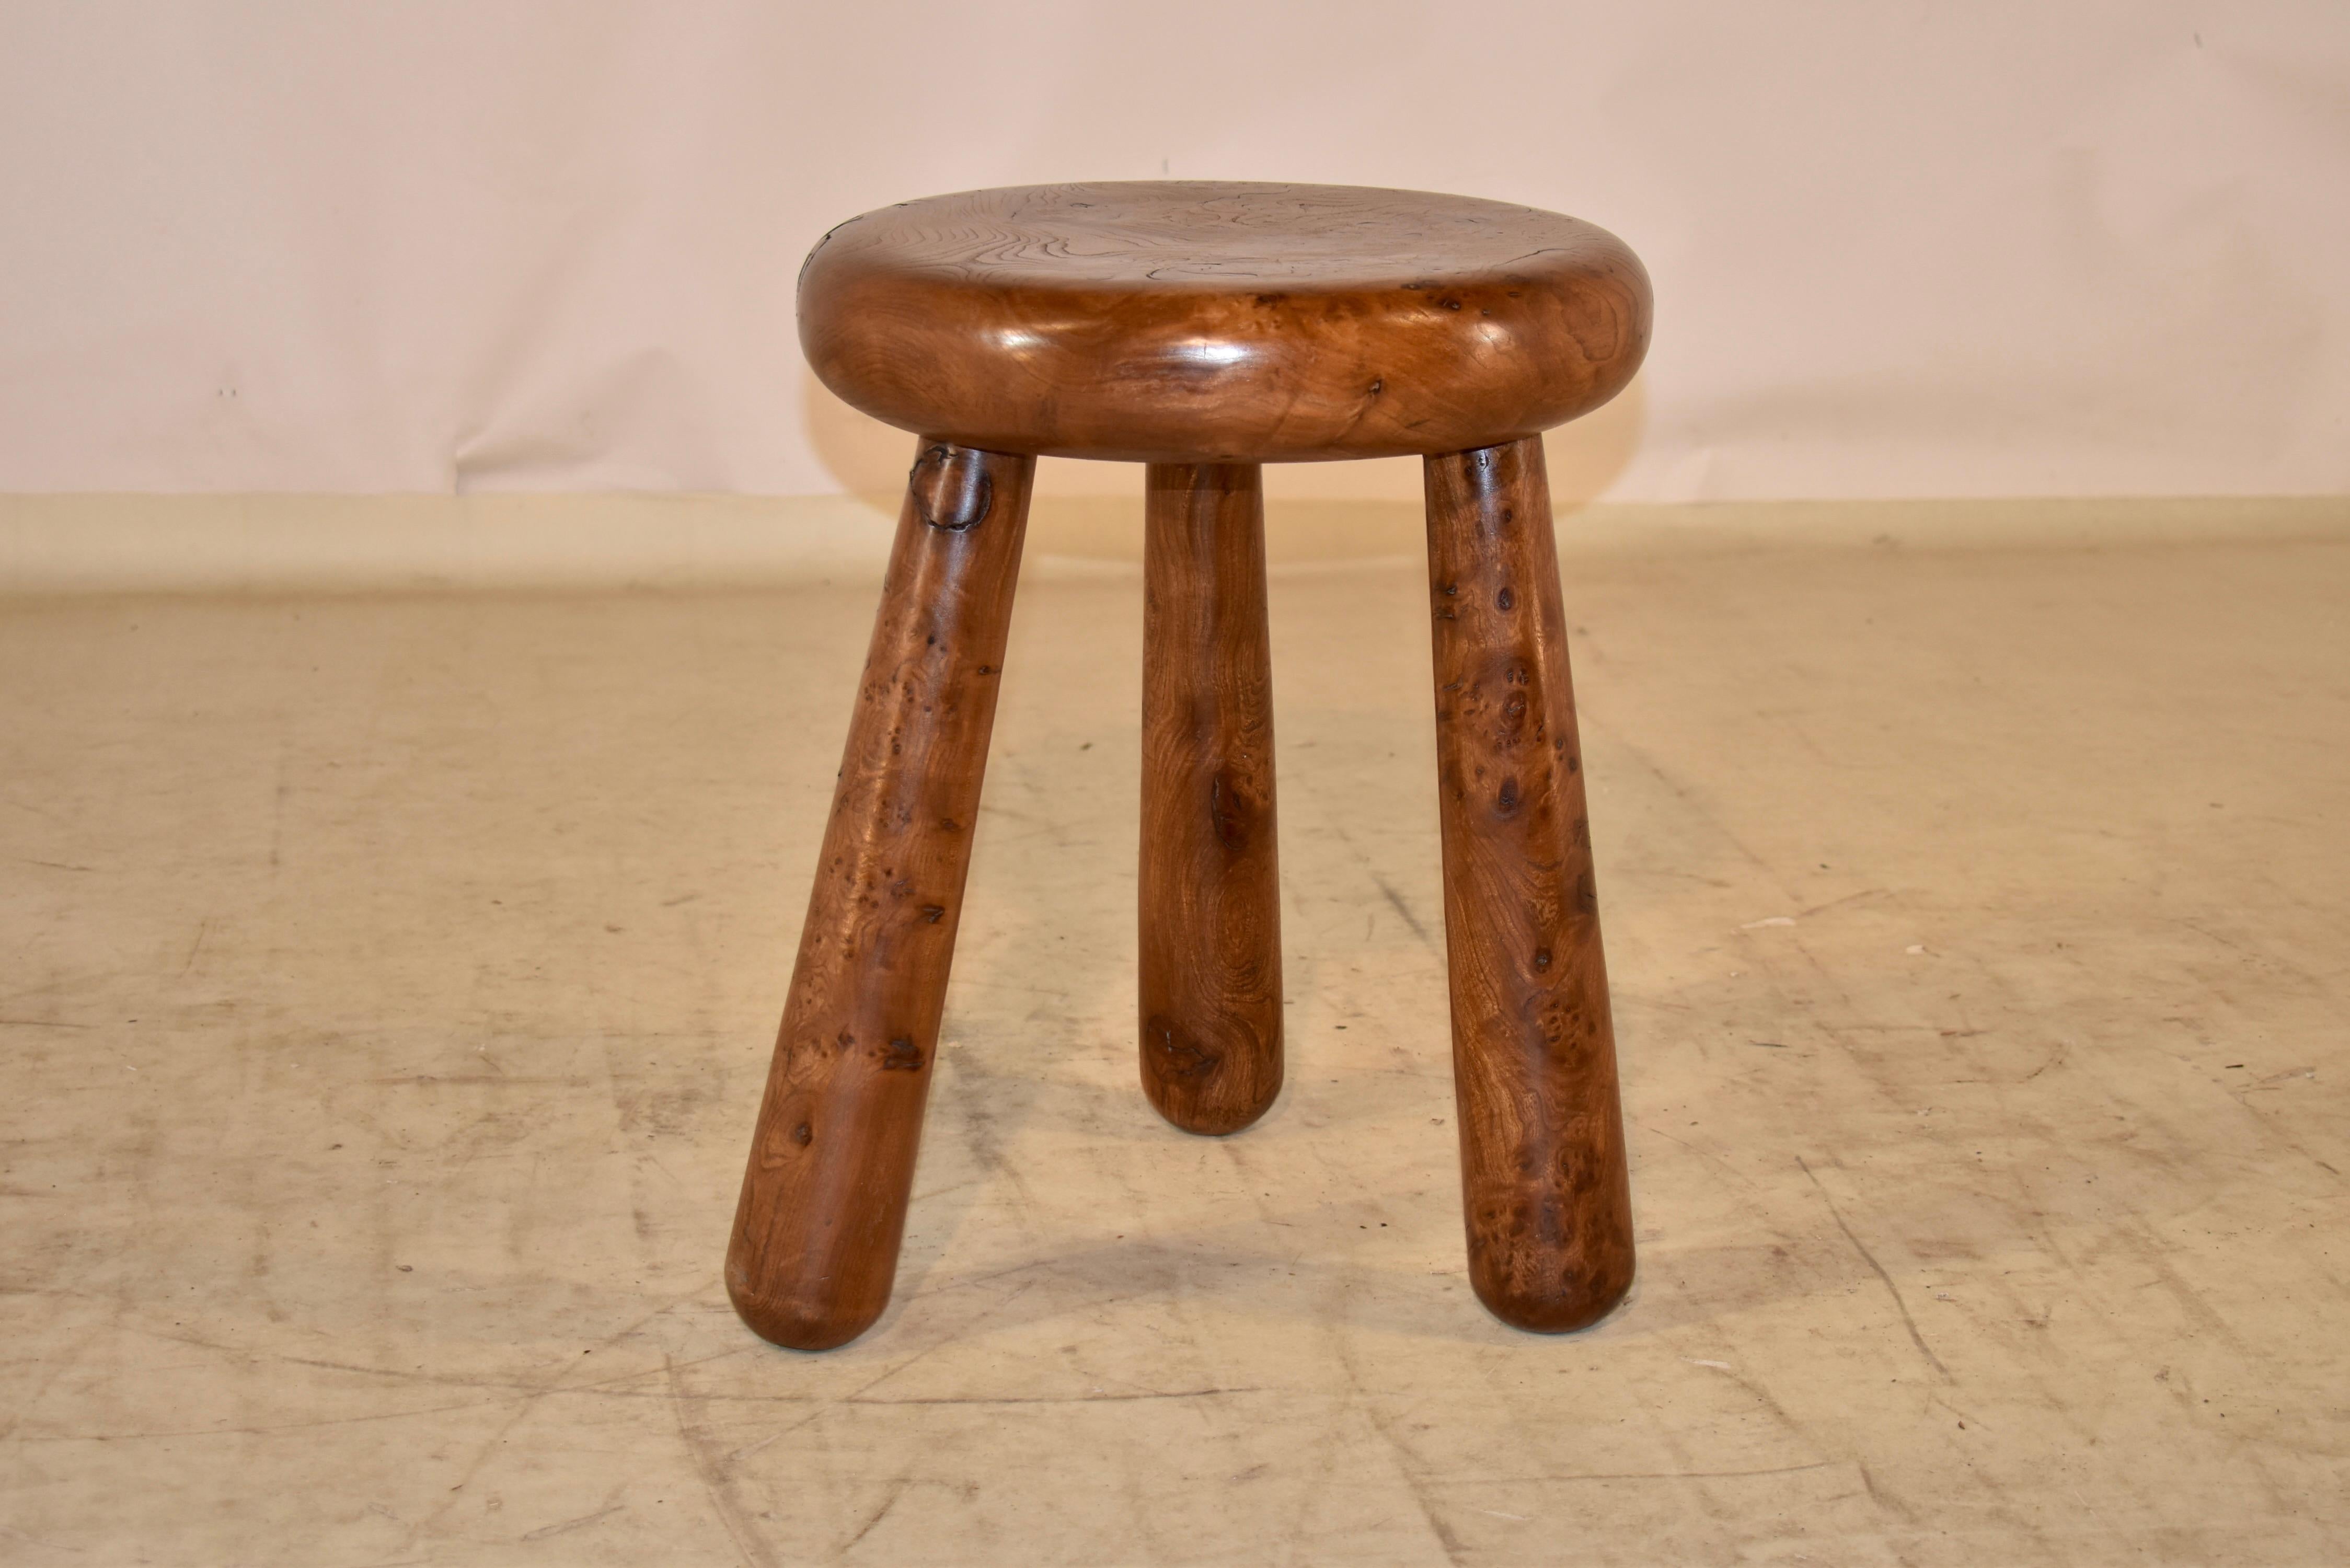 Fabulous Mid-Century Modern burl elm stool from France. The top measures 14.5 inches in diameter, and is a thickly hand turned and solid piece of burl elm. The stool is supported on three wonderfully modern tapered legs. This stool has such a